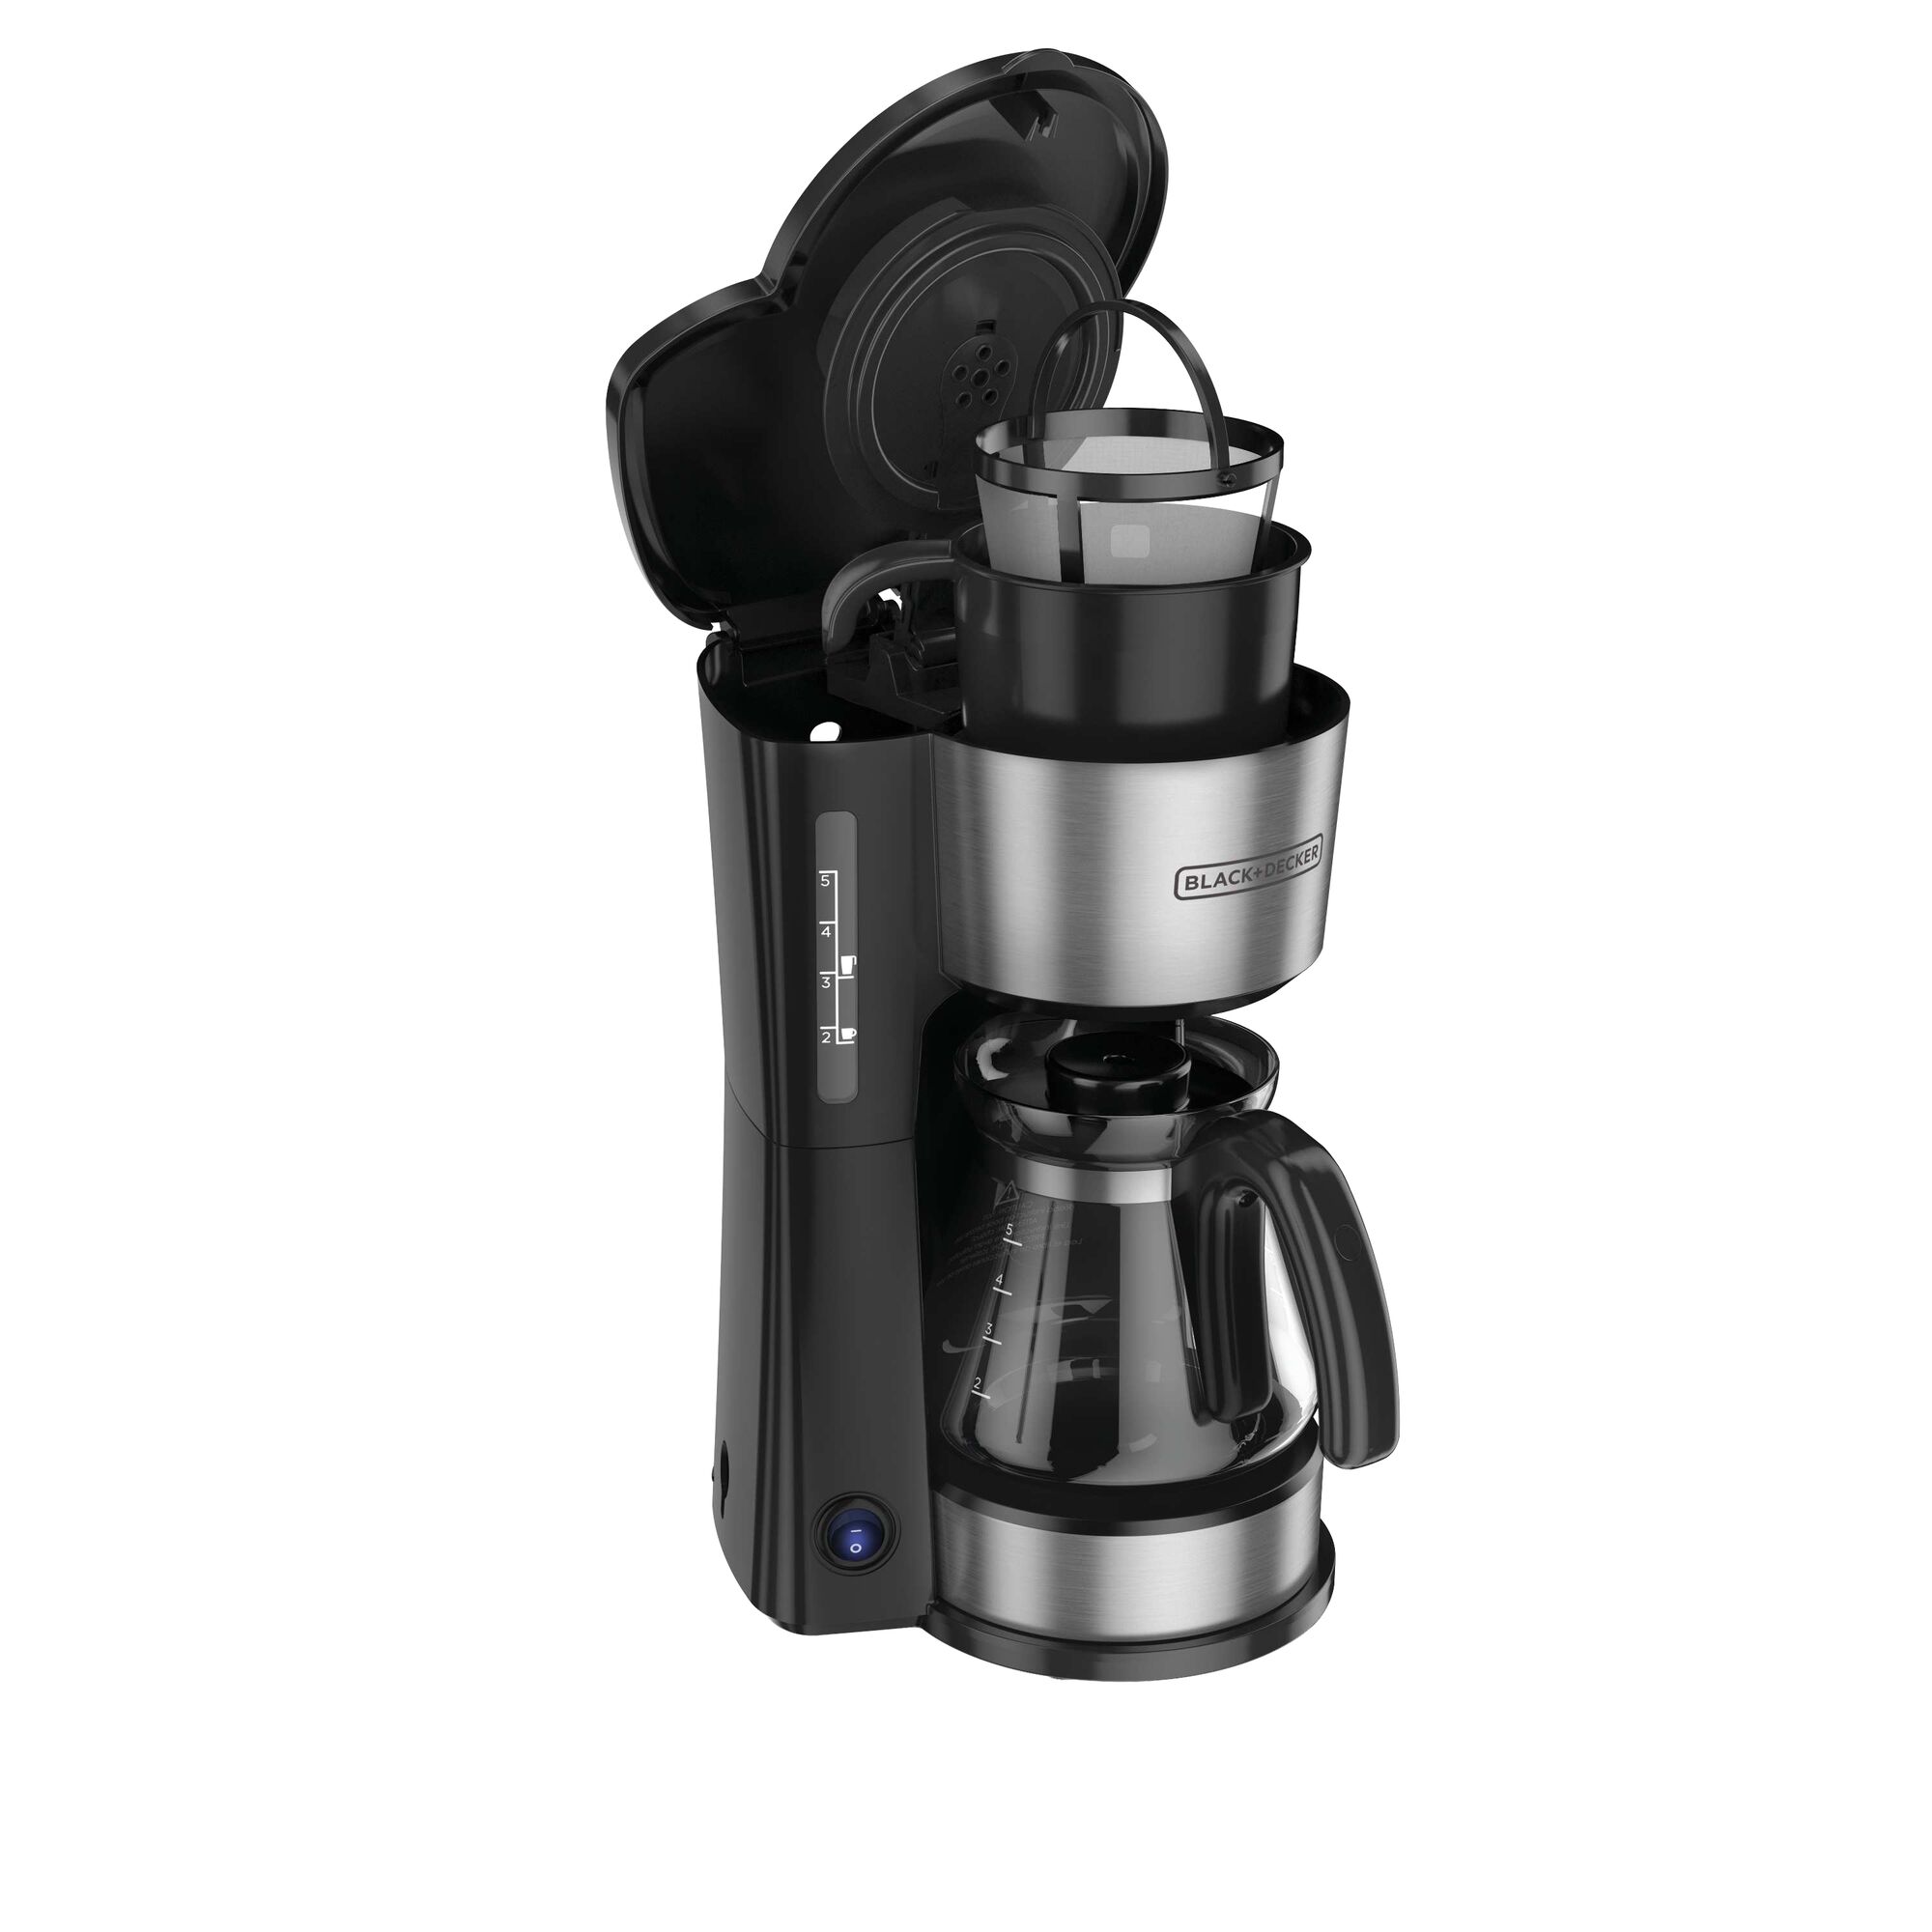 Profile of 4 in 1 5 cup coffee station coffeemaker.